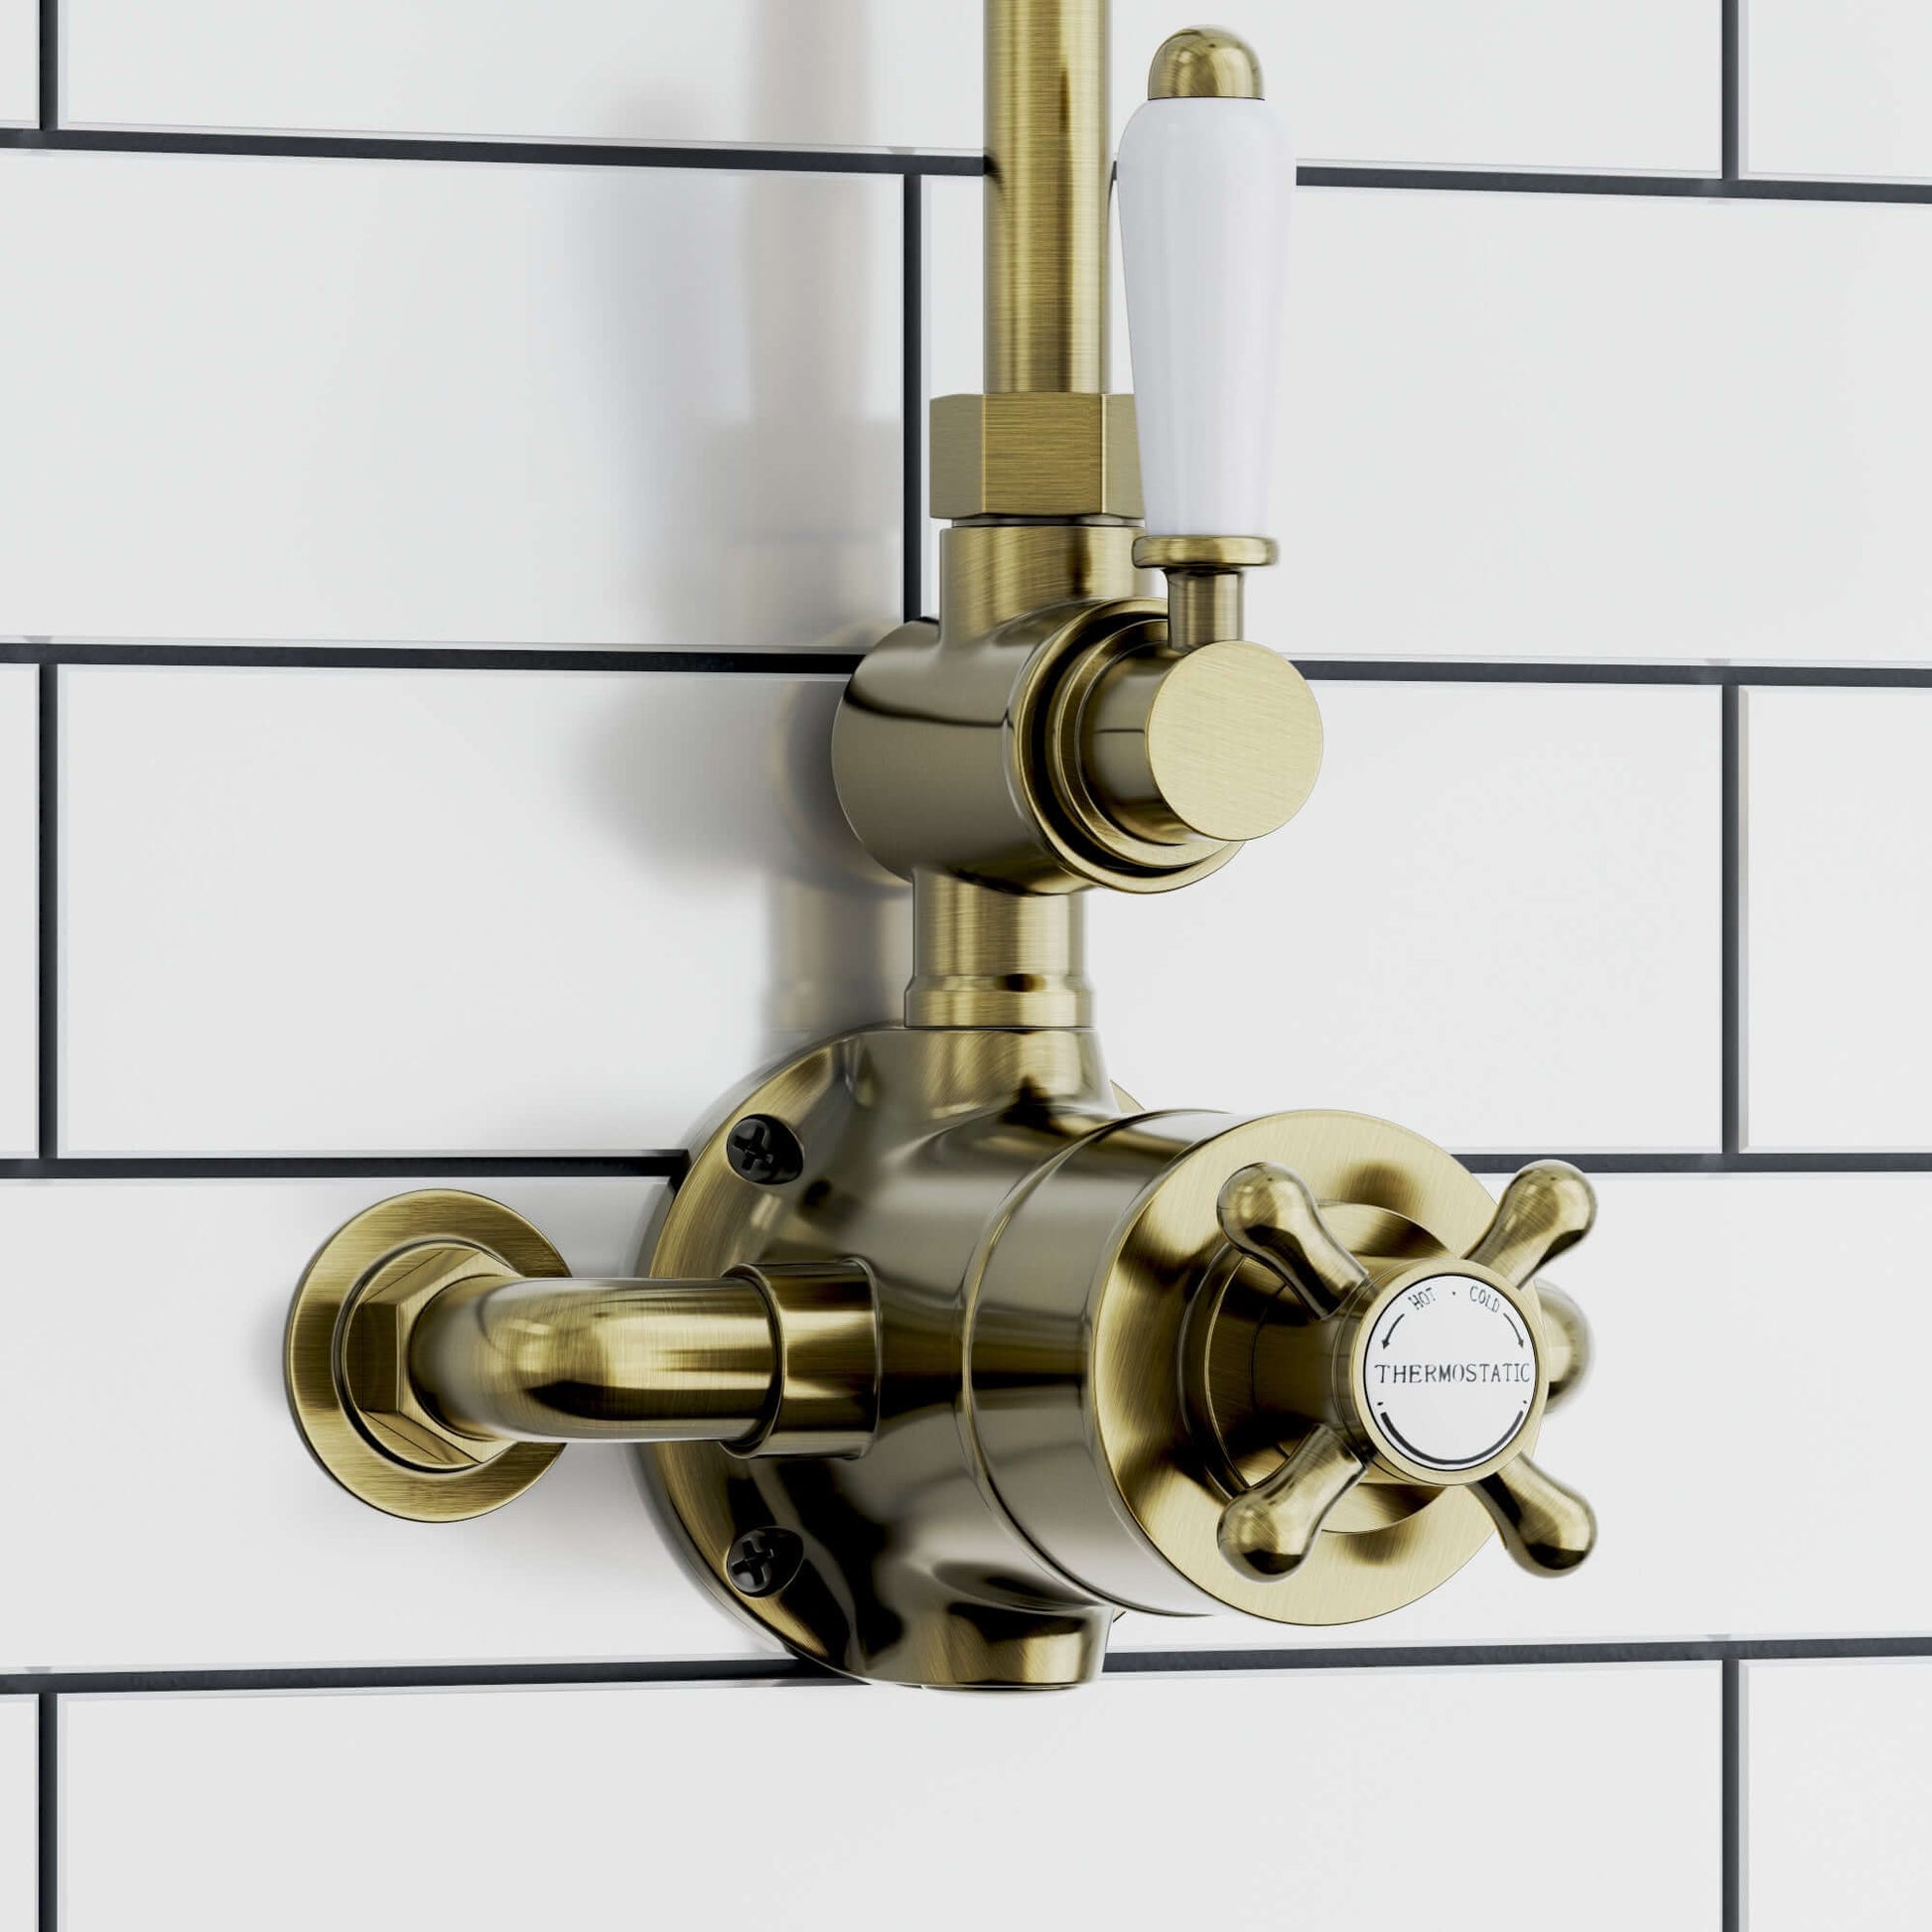 Downton Exposed Traditional Thermostatic Shower Set 2 Outlet Incl. Twin Shower Valve With Diverter, Rigid Riser Rail, 200mm Shower Head & Ceramic Handset - Antique Bronze And White - Showers